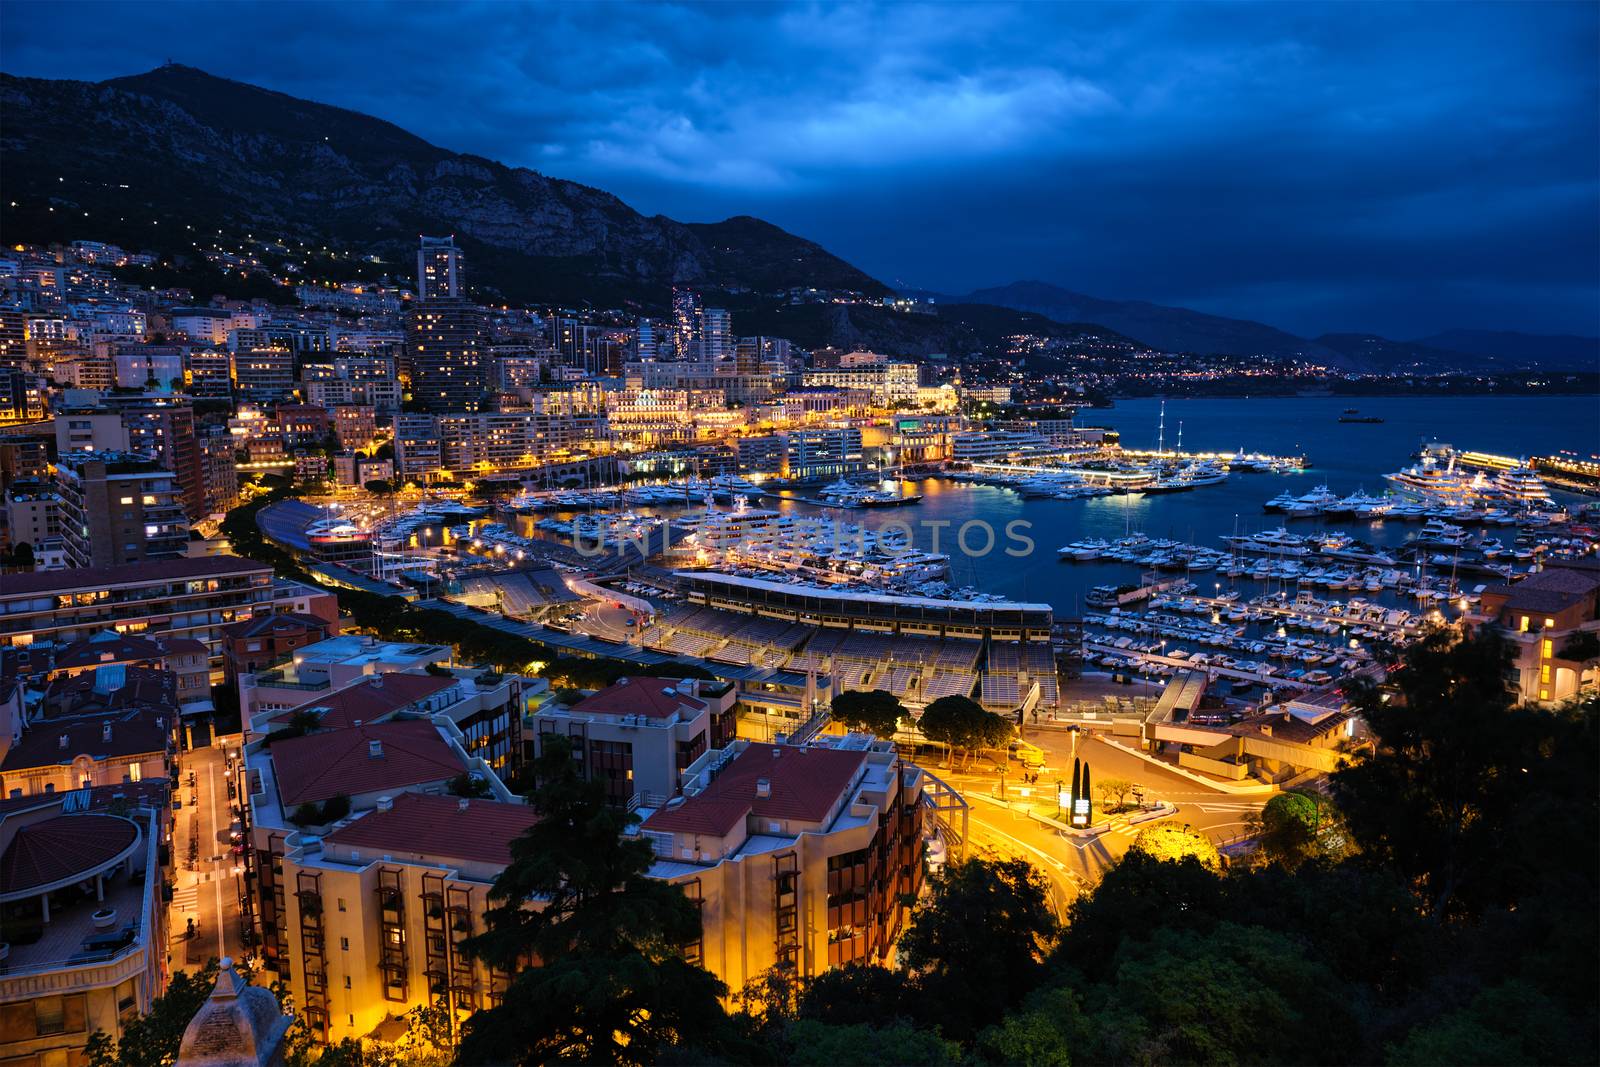 View of Monaco in the night by dimol